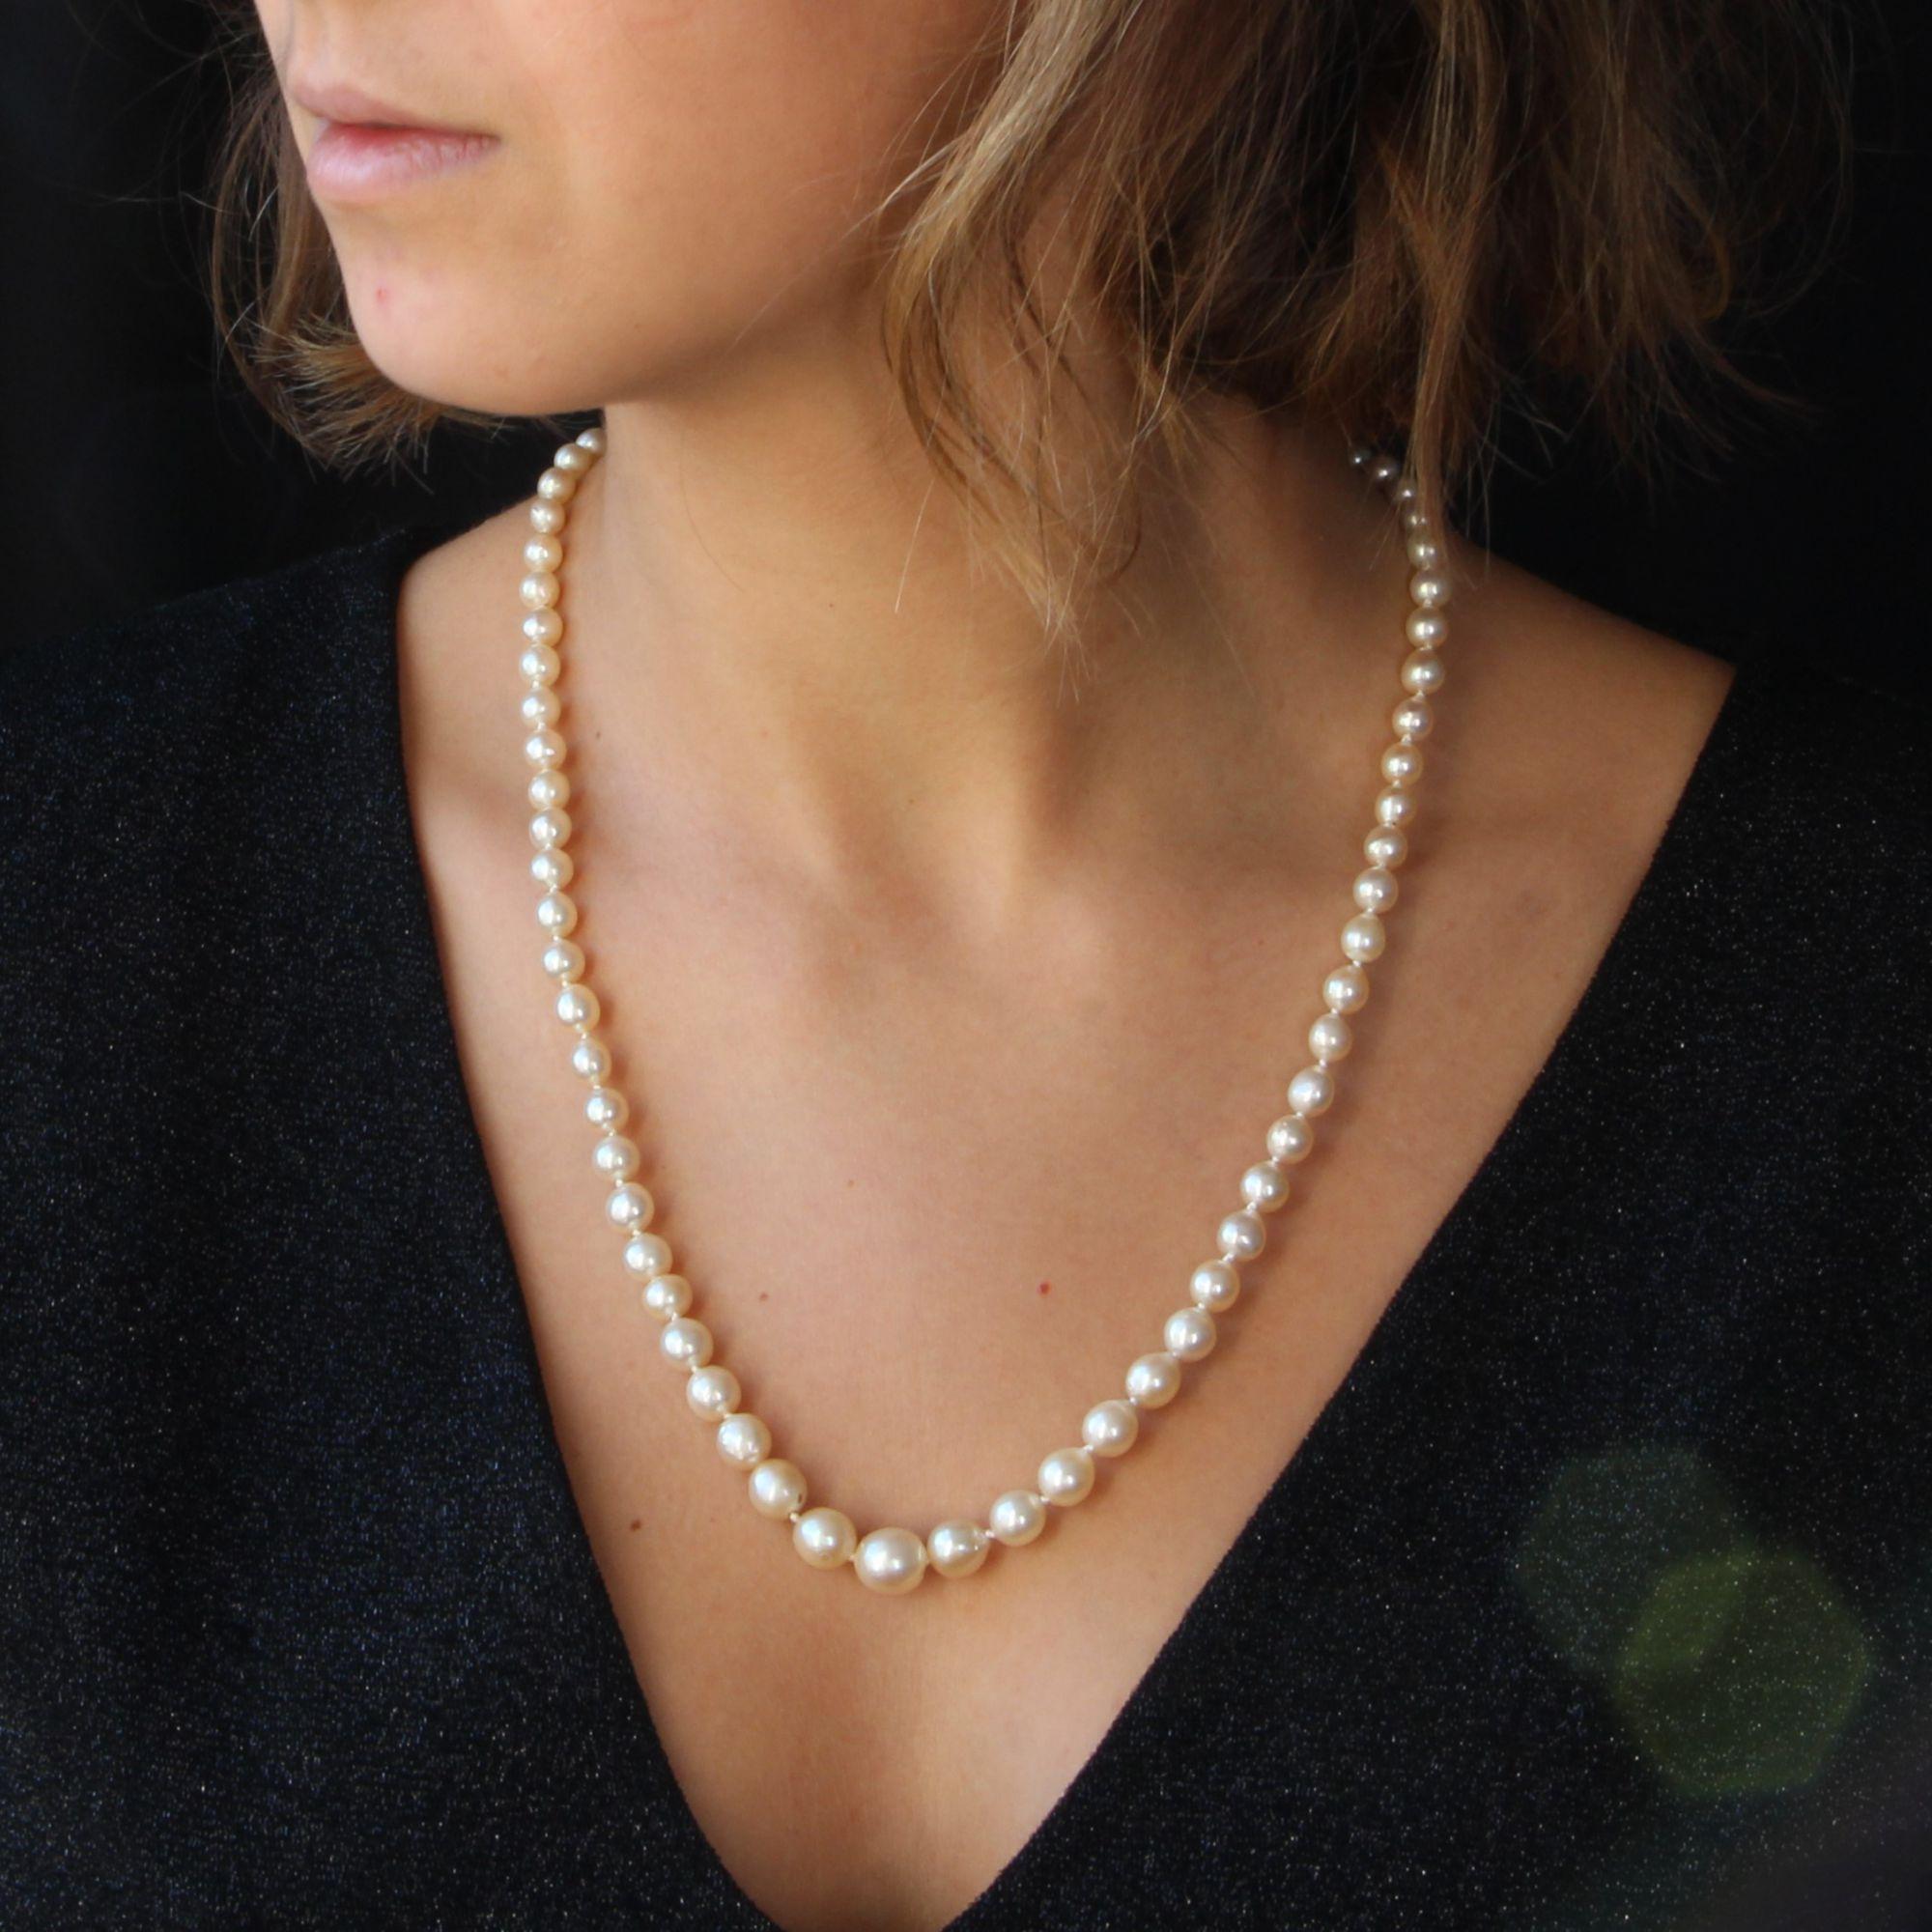 Necklace of cultured pearls in fall baroque in the bright pearly white orient.
The clasp is in 18 karat yellow gold, shuttle-shaped and set with 6 rose-cut diamonds and a half cultured pearl. It also has a safety chain.
Authentic antique jewel -